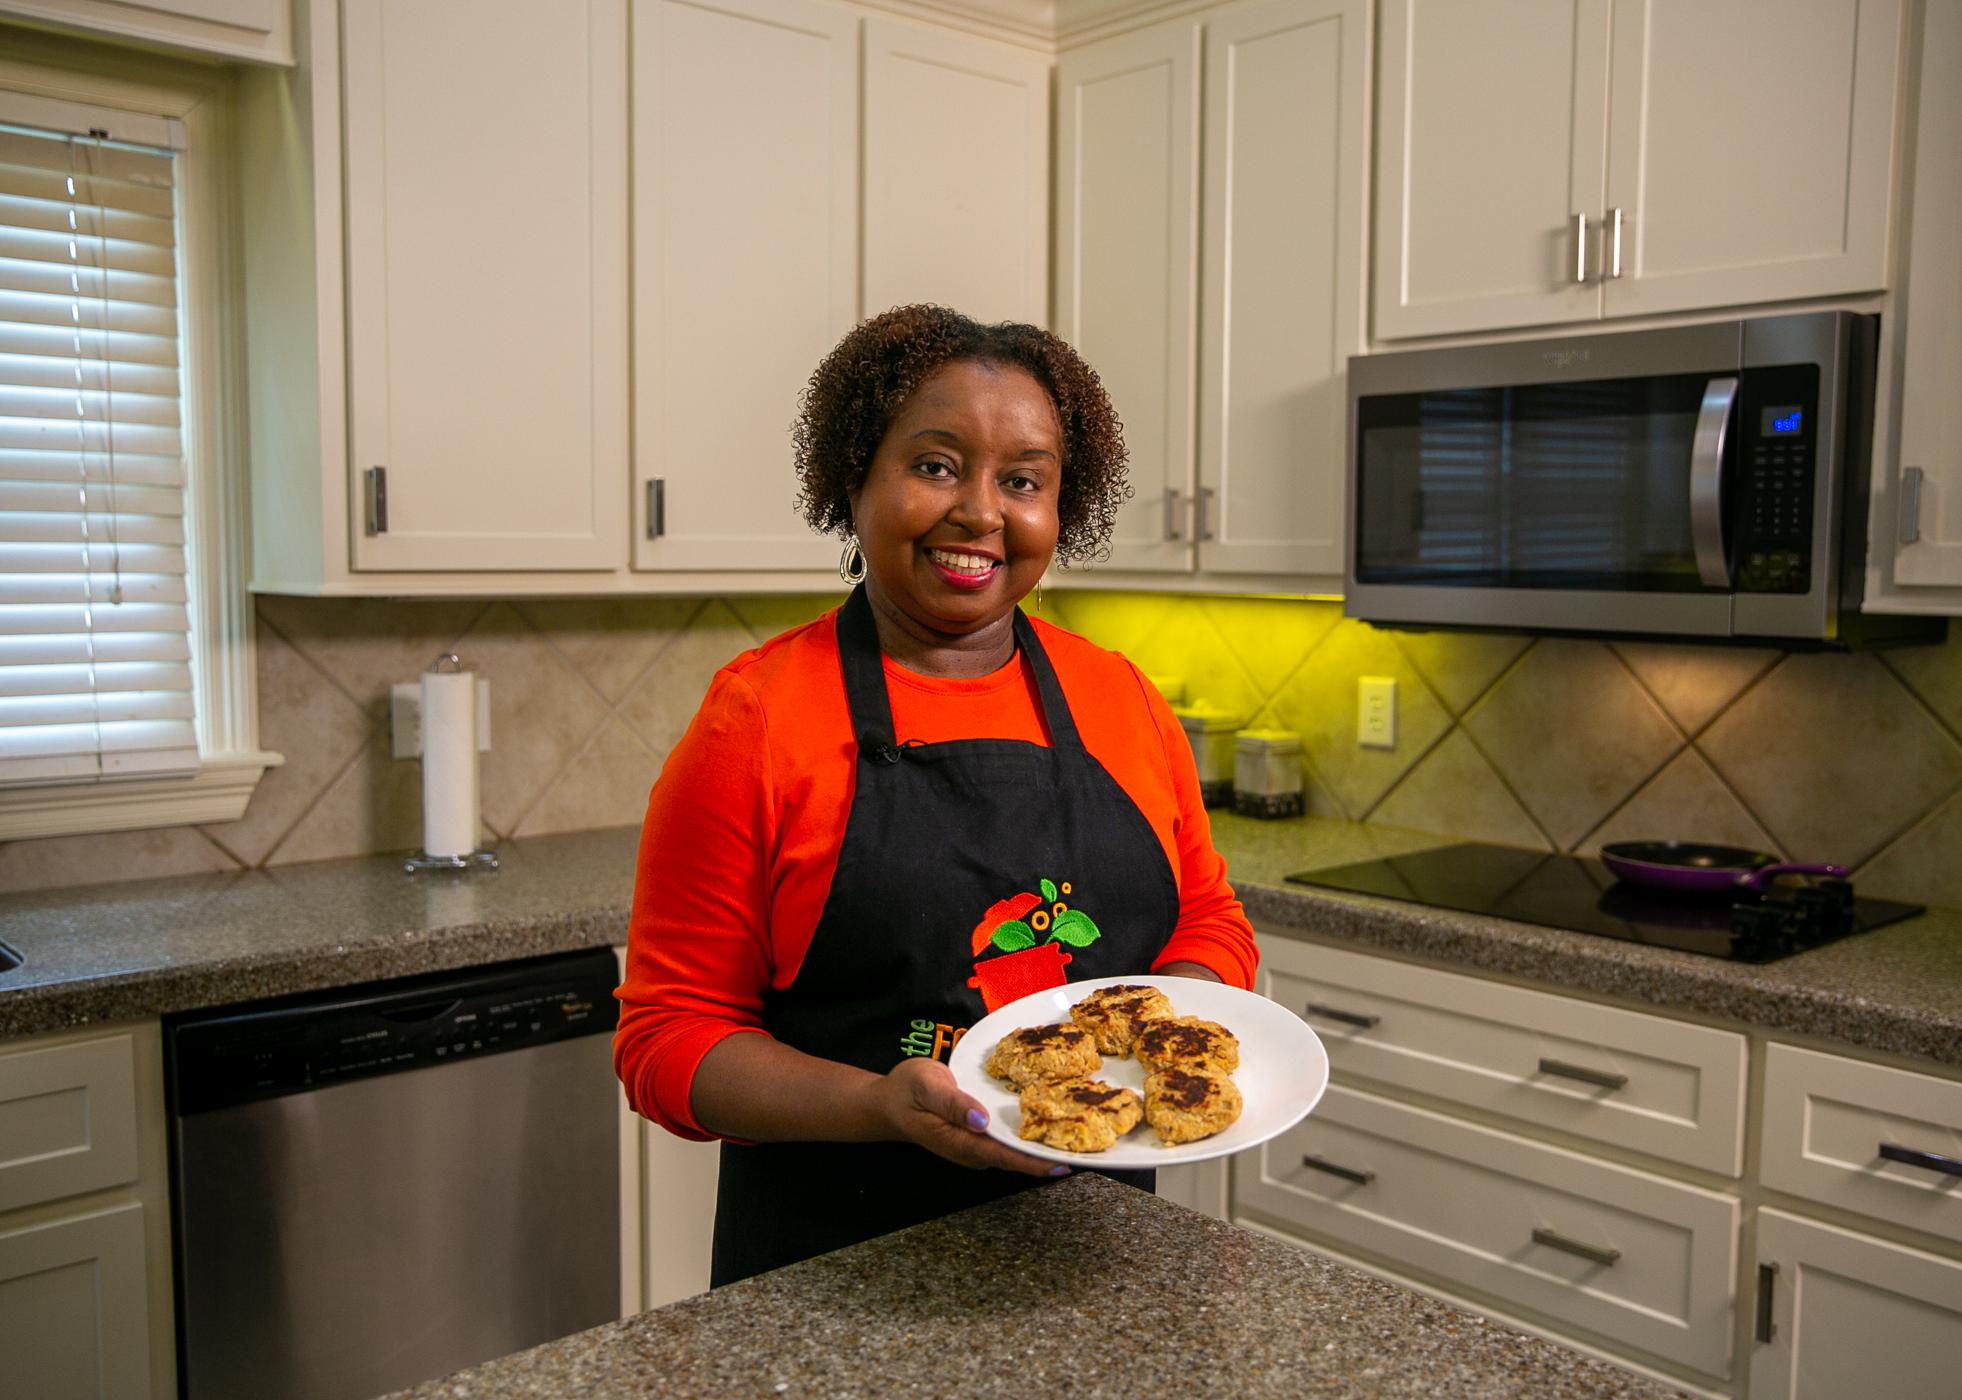 A woman stands in a kitchen holding a plate of salmon patties for the camera.